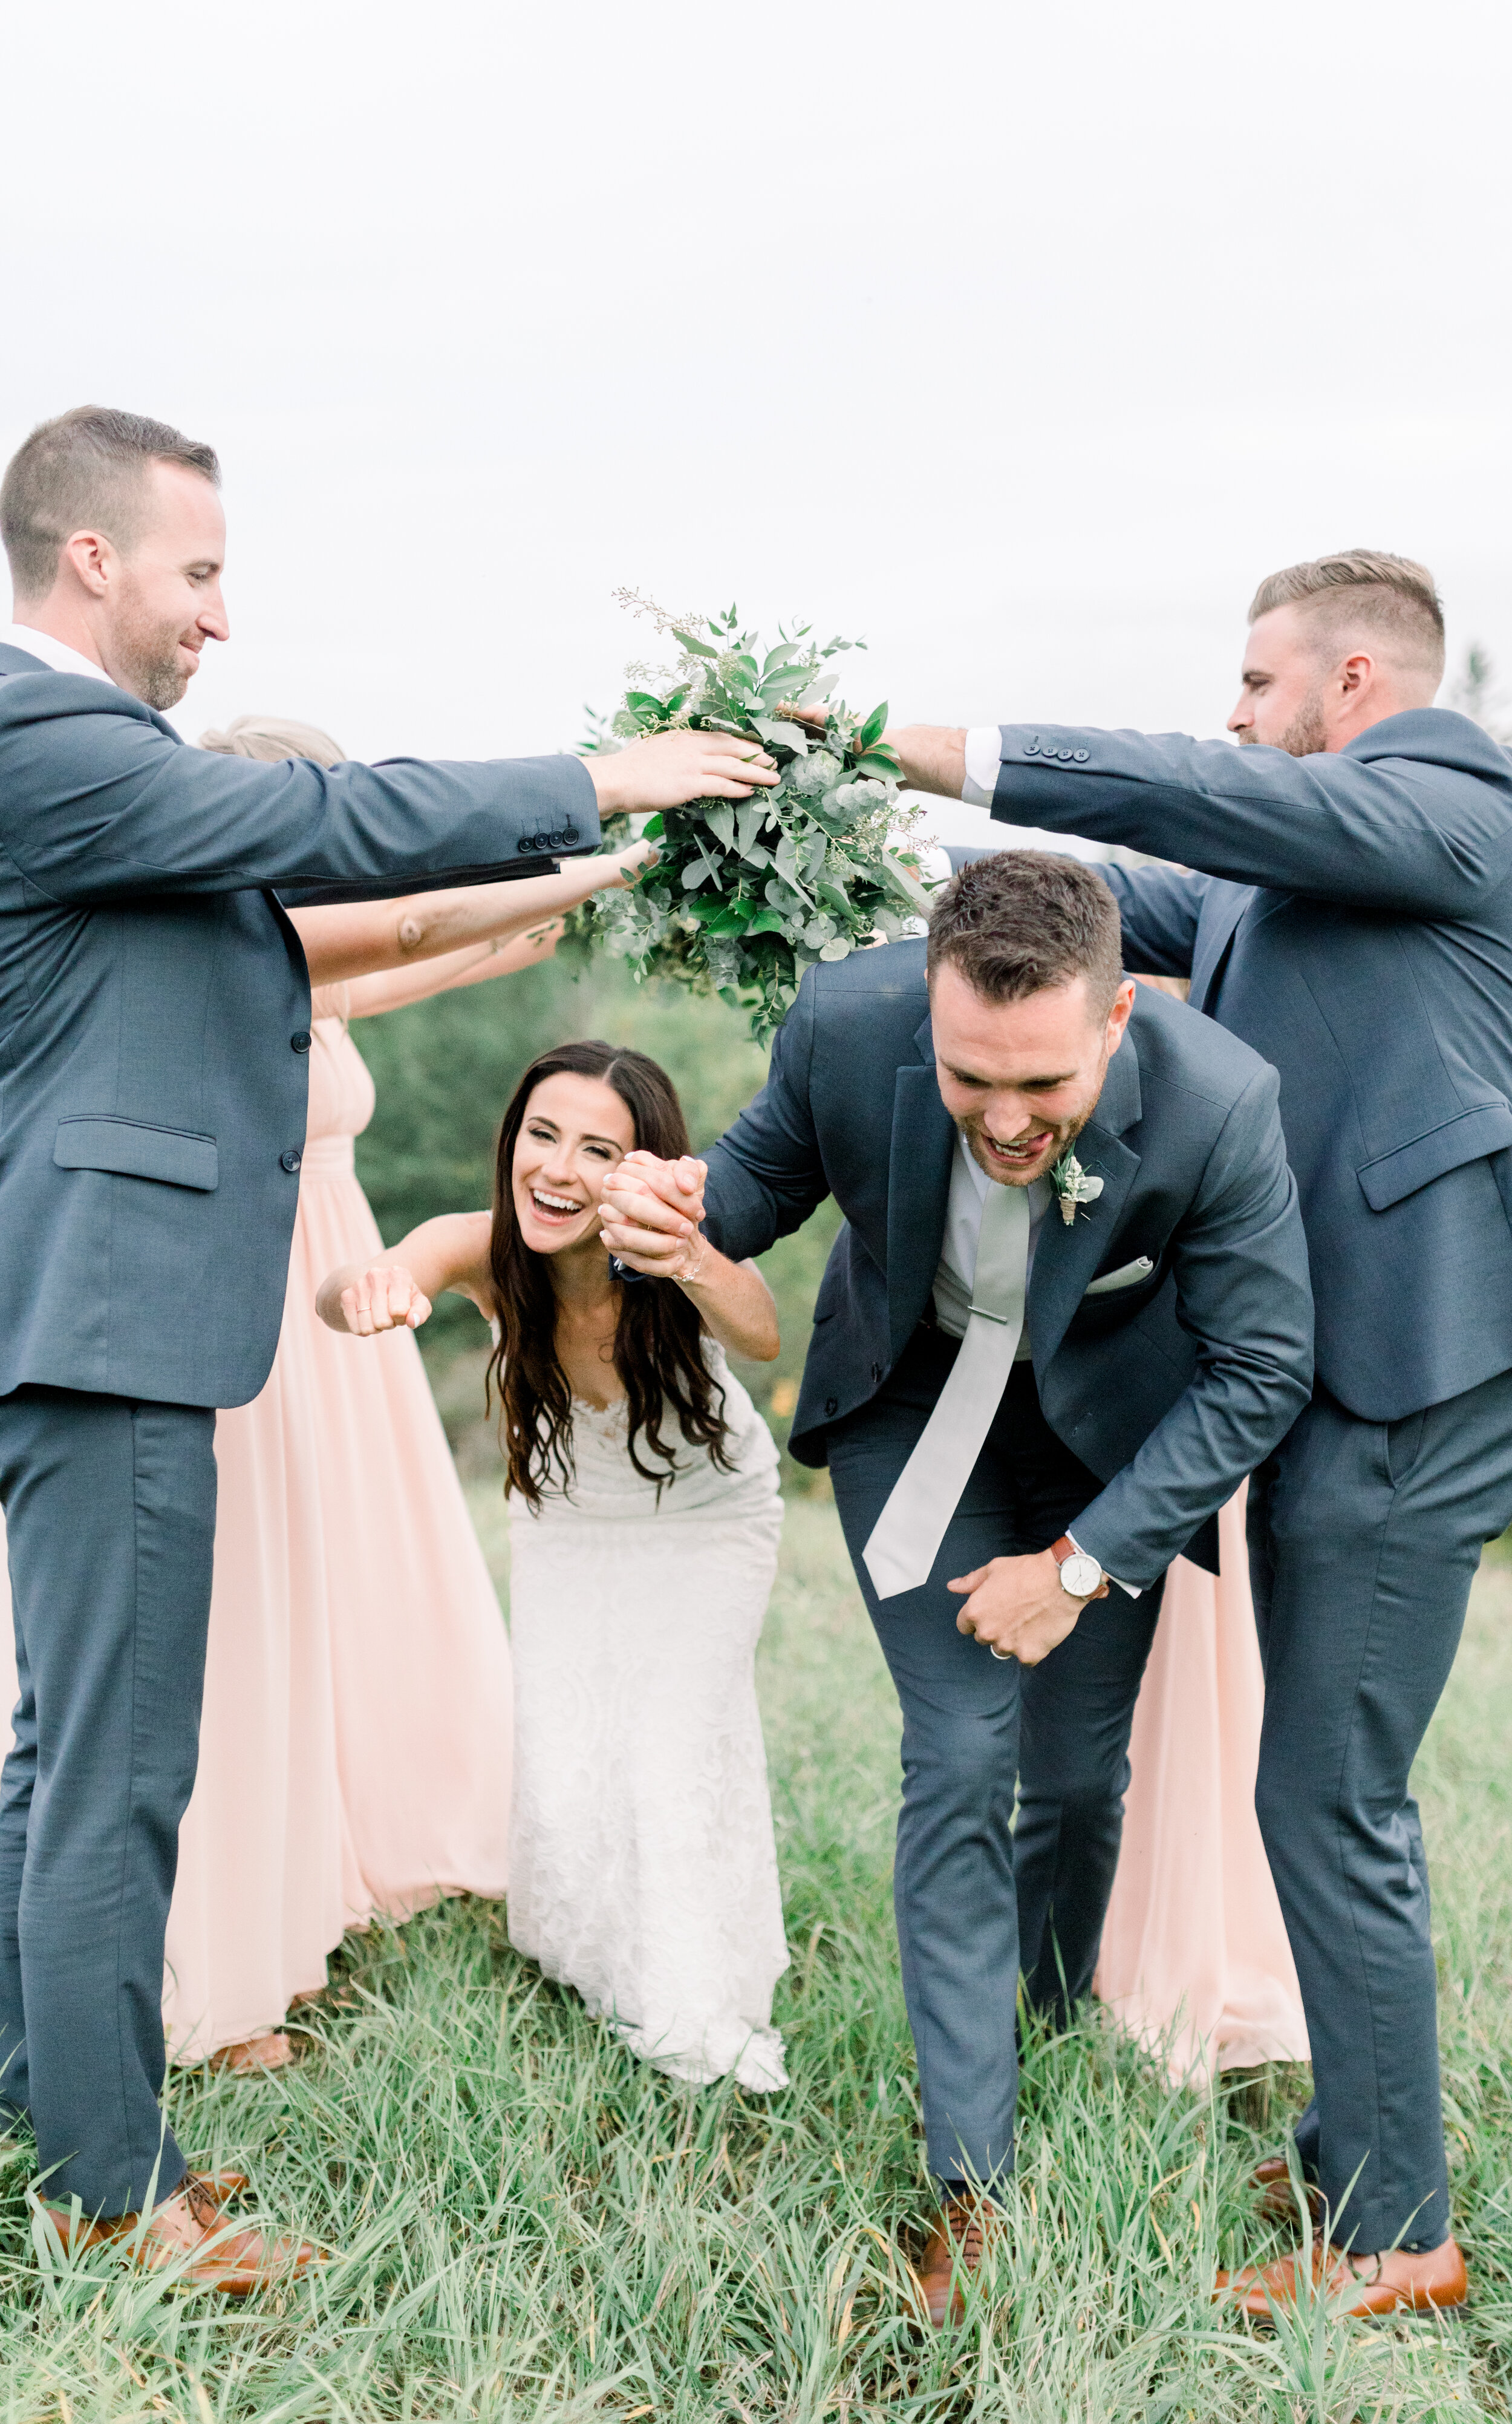  An intimate send off for the bride and groom after their wedding in Ottawa, Ontario with Chelsea Mason Photography. Send off intimate small wedding inspo wedding party tunnel celebration happy love marriage husband and wife honeymoon pink bridesmaid